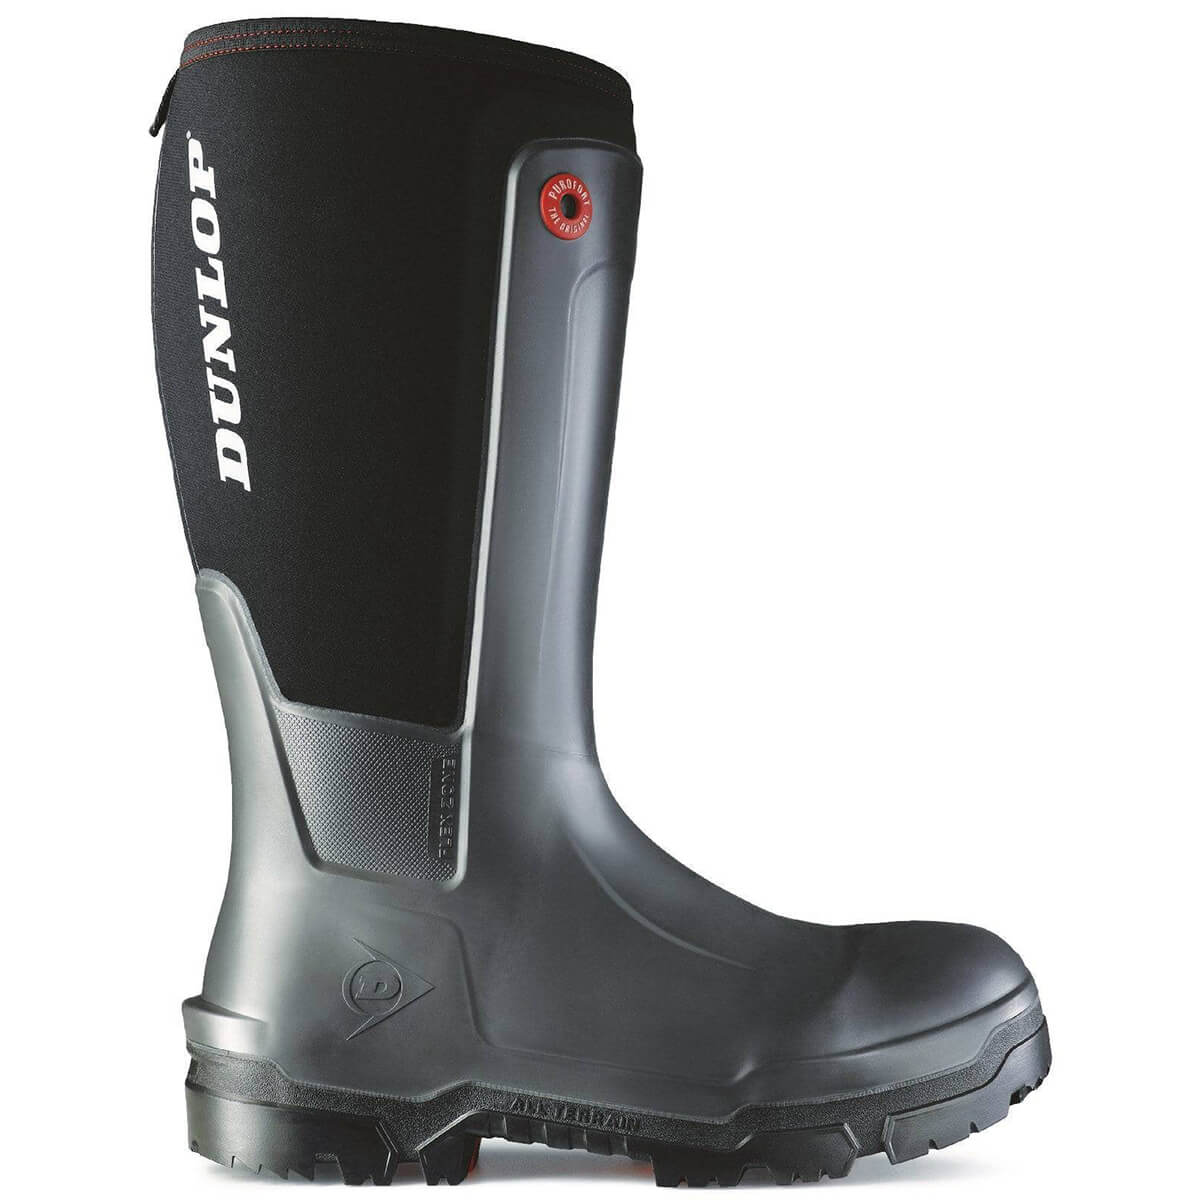 Dunlop Snugboot Workpro Full Safety Wellington Boots - Shoe Store Direct